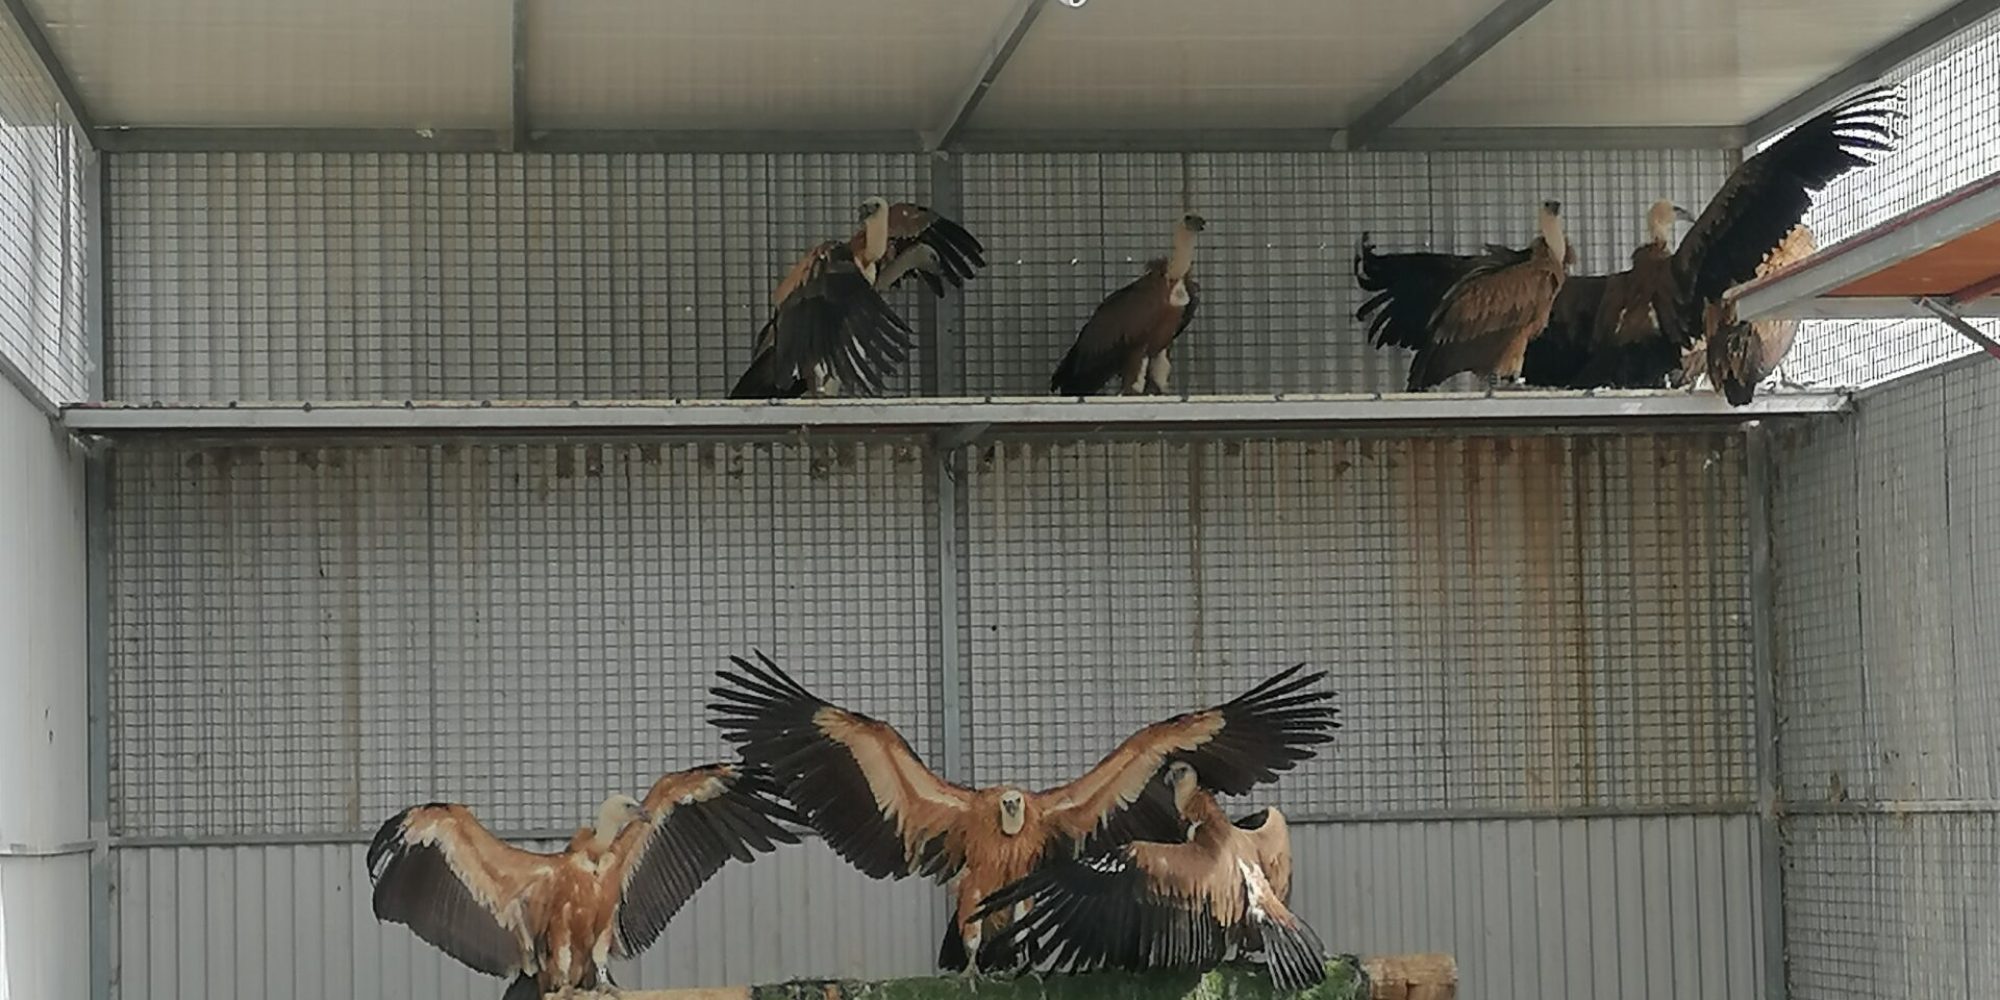 14 more Griffon Vultures have arrived from Spain